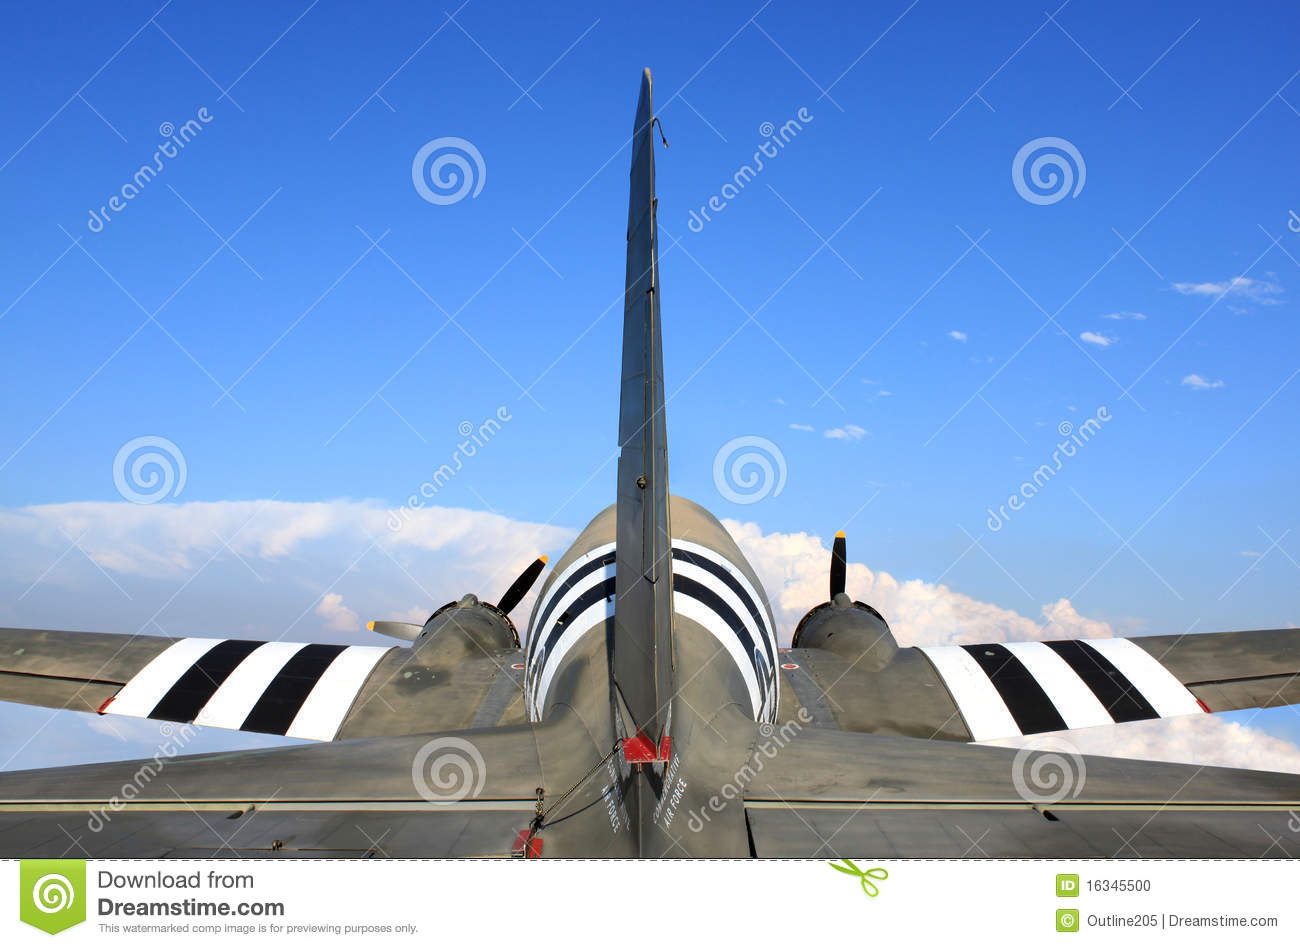 Old Air Force Propeller Plane With Background Of Sky And Clouds 